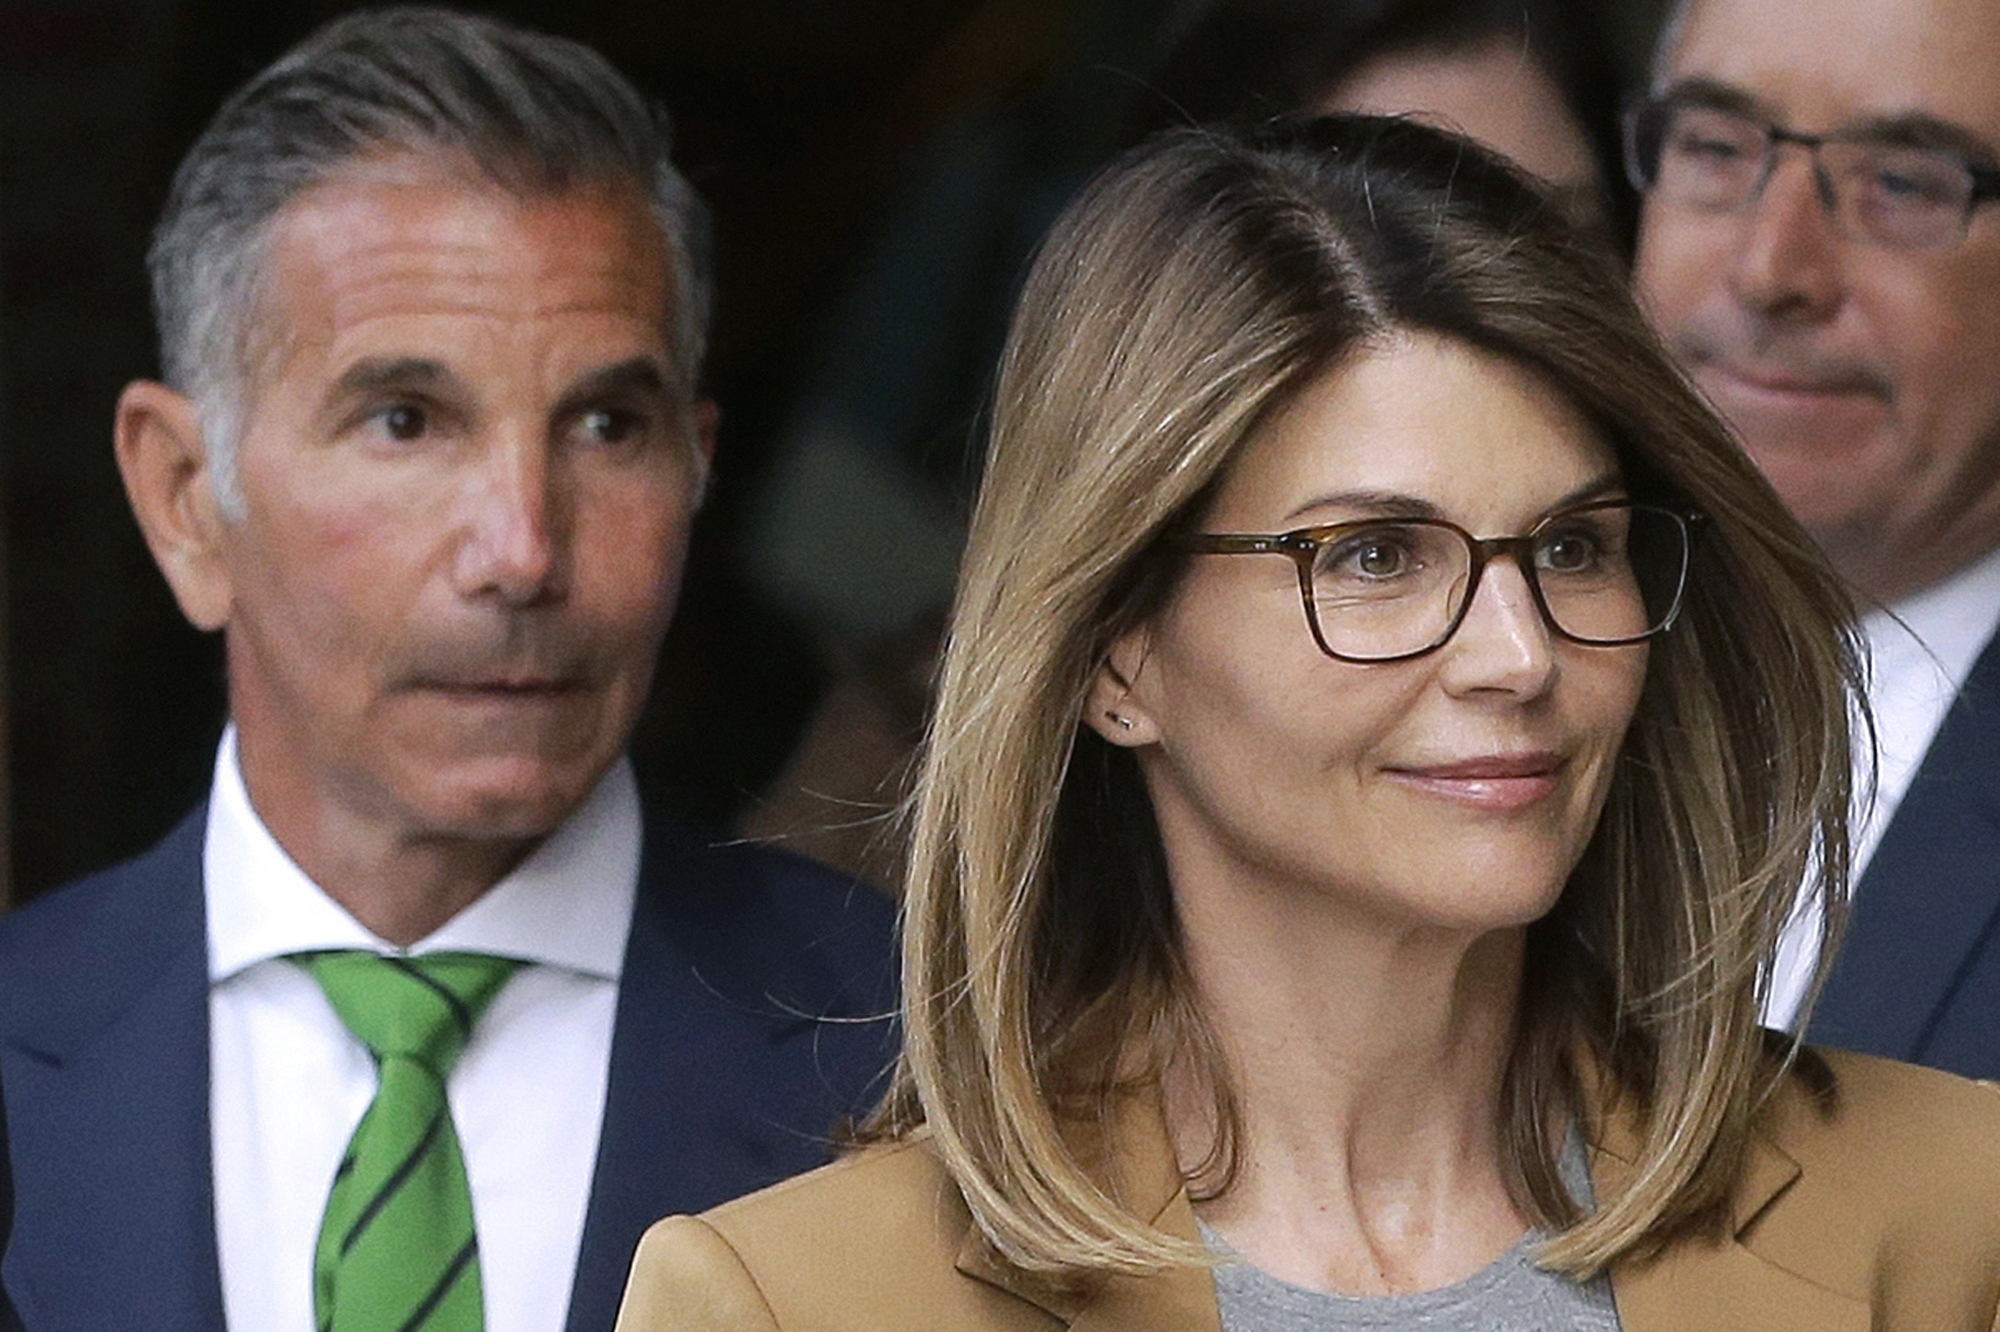 Lori Loughlin Sentenced to 2 Months in Prison After Pleading Guilty in College Admissions Scandal